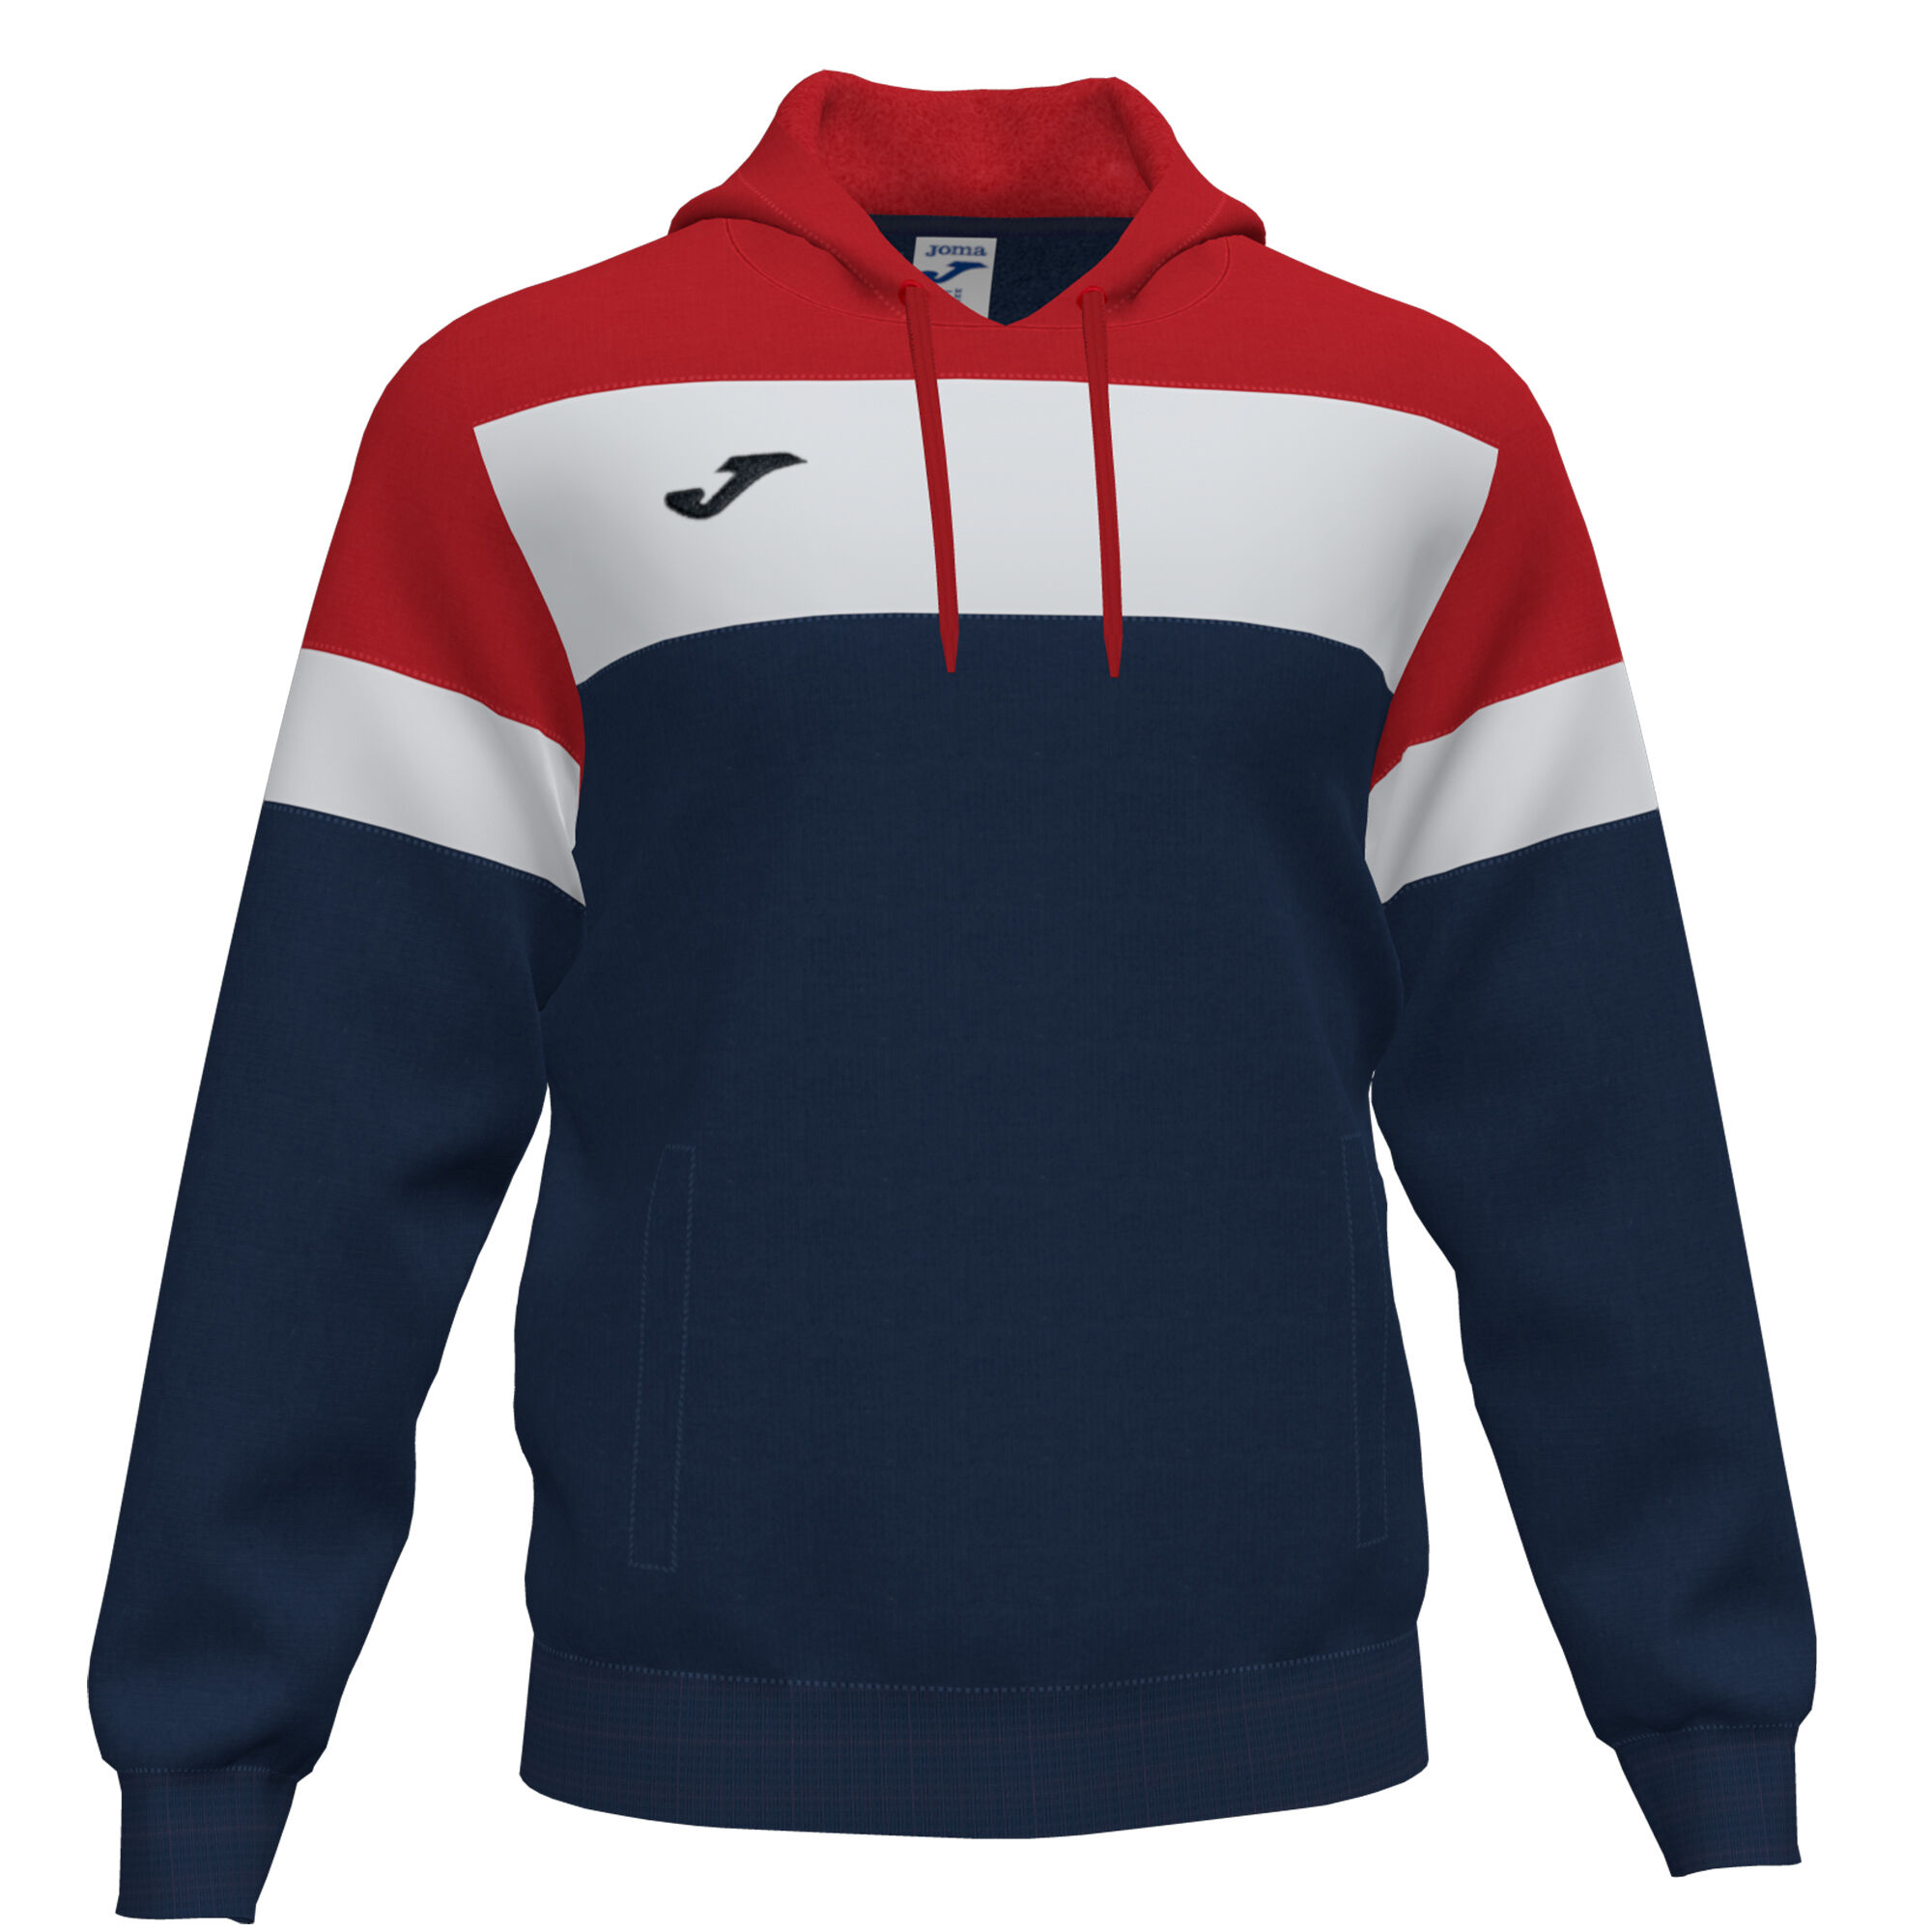 HOODED SWEATER MAN CREW IV NAVY BLUE RED